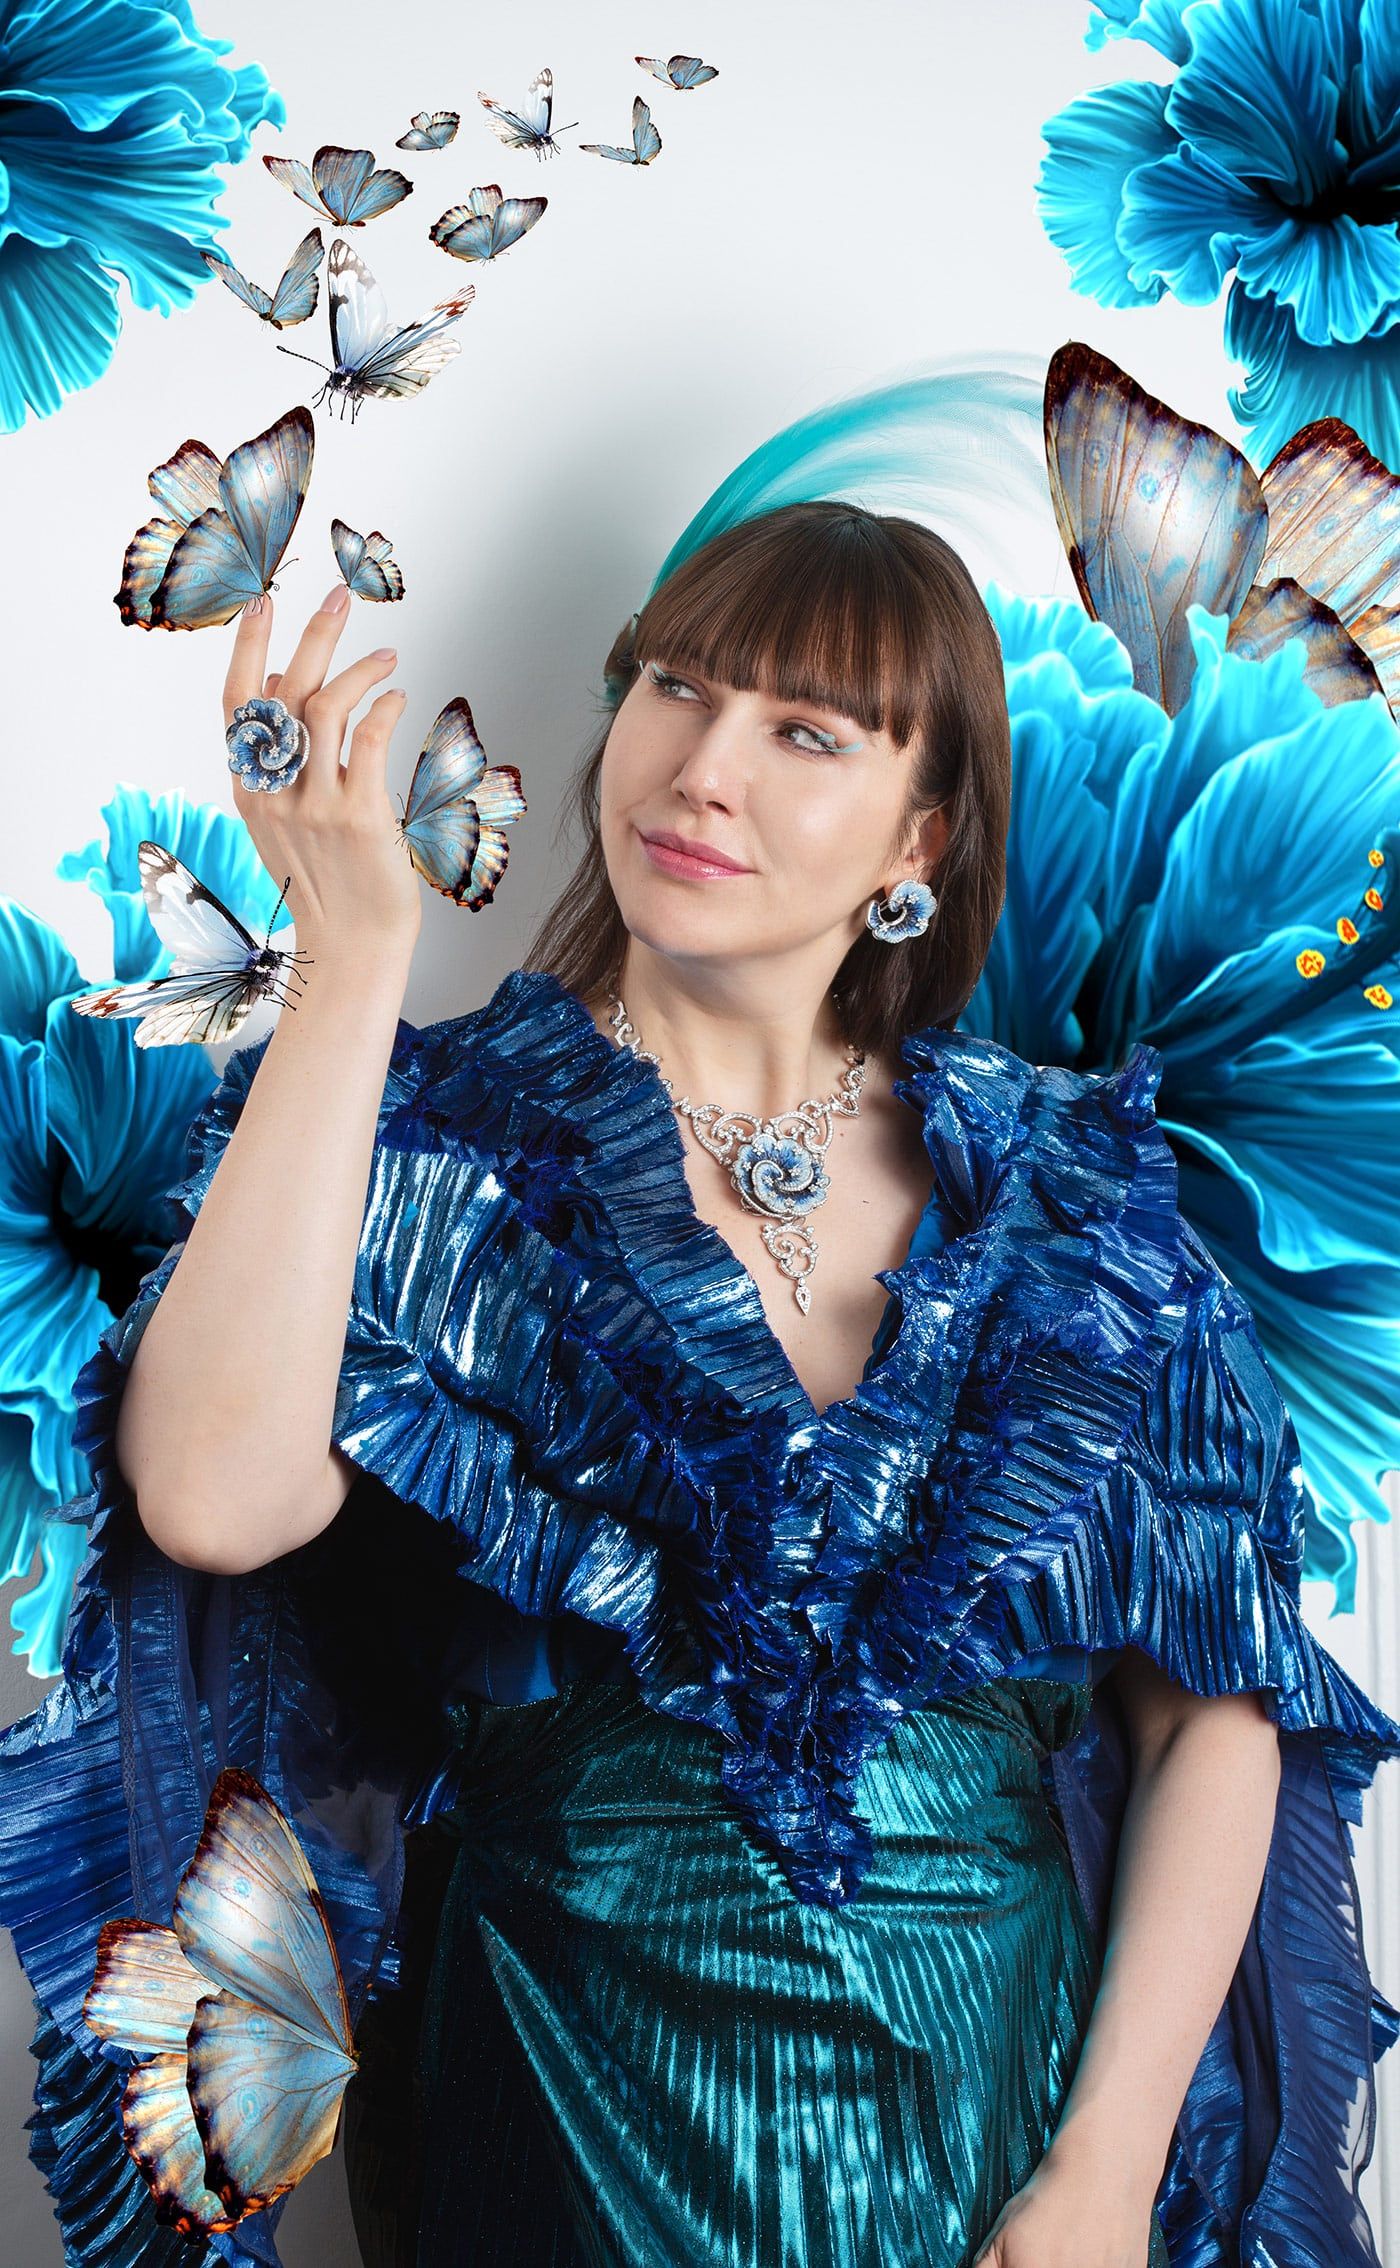 The micromosaic and diamond set is by SICIS, the dress is by Janina Juliee, the feather ornament is by Sandrine Bourg